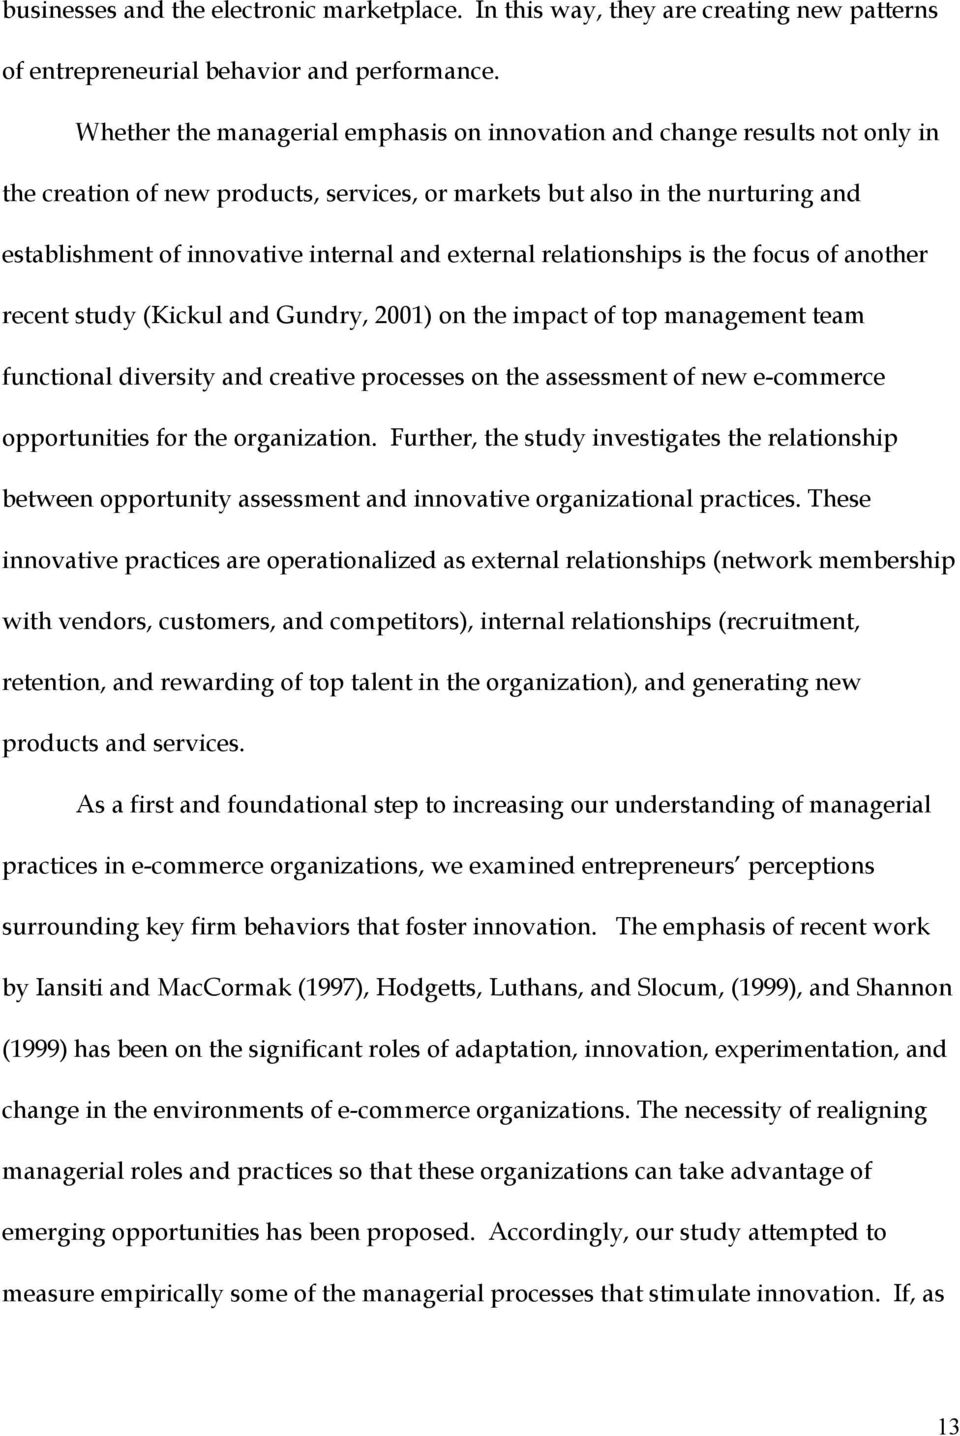 external relationships is the focus of another recent study (Kickul and Gundry, 2001) on the impact of top management team functional diversity and creative processes on the assessment of new